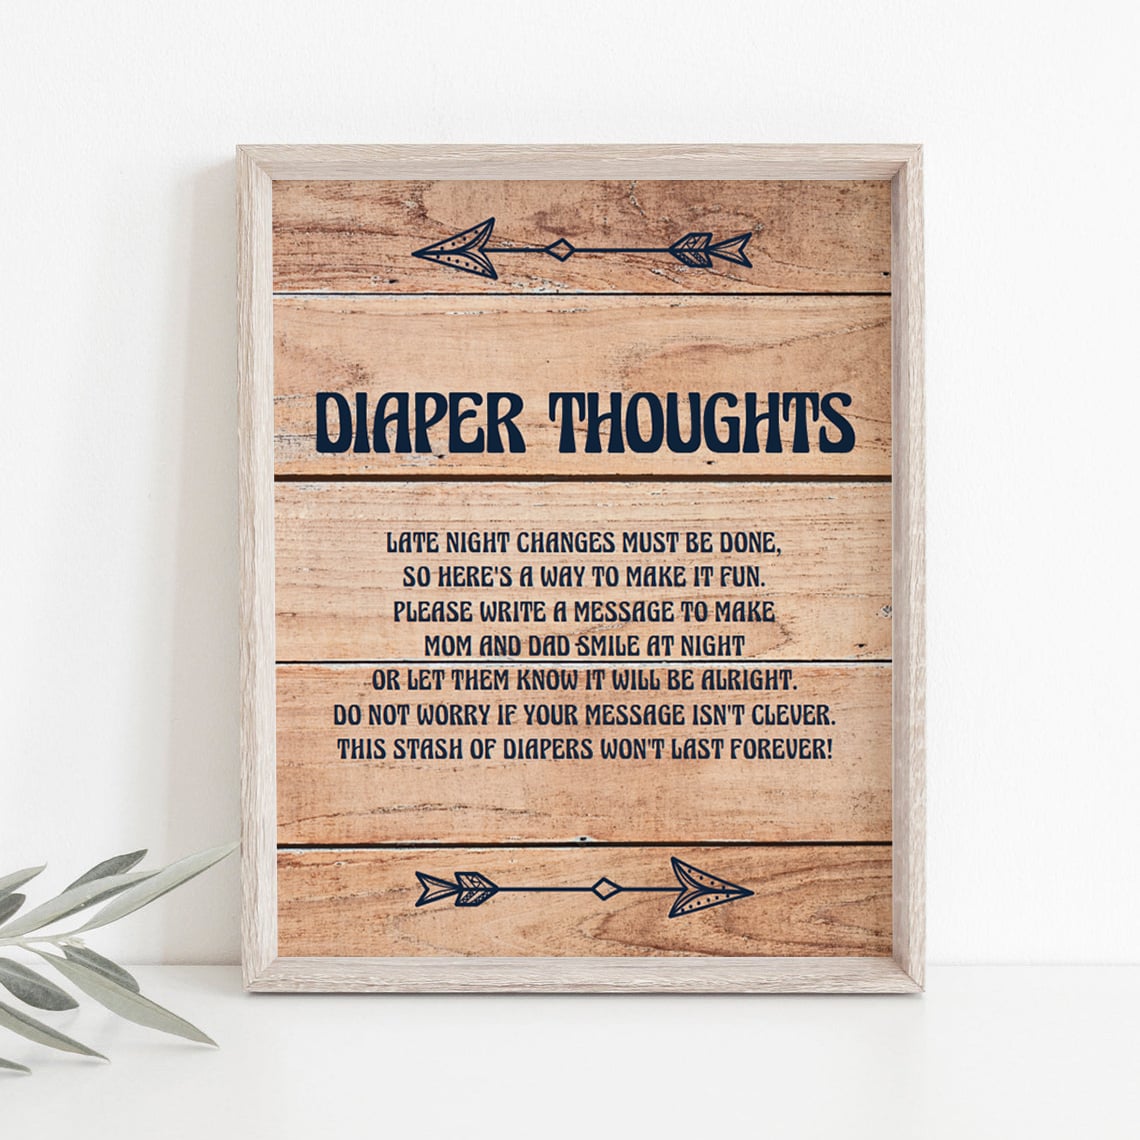 Woodland baby shower diaper thoughts game by LittleSizzle